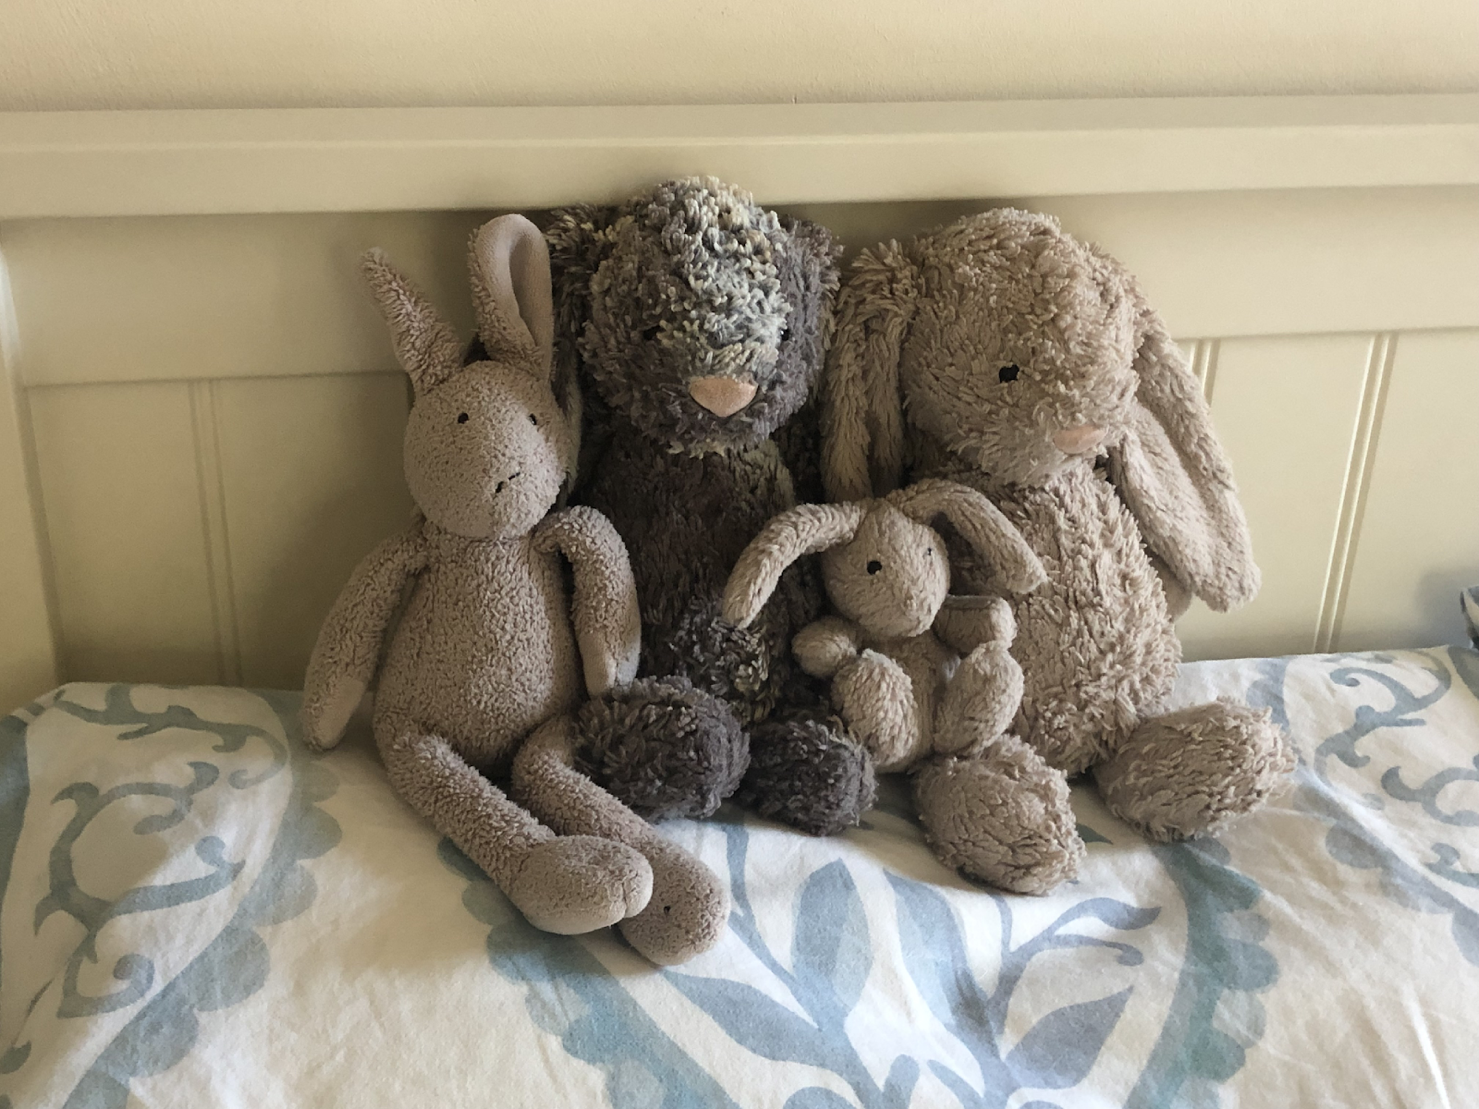 Is it a problem when adults sleep with stuffed animals? - Reviewed